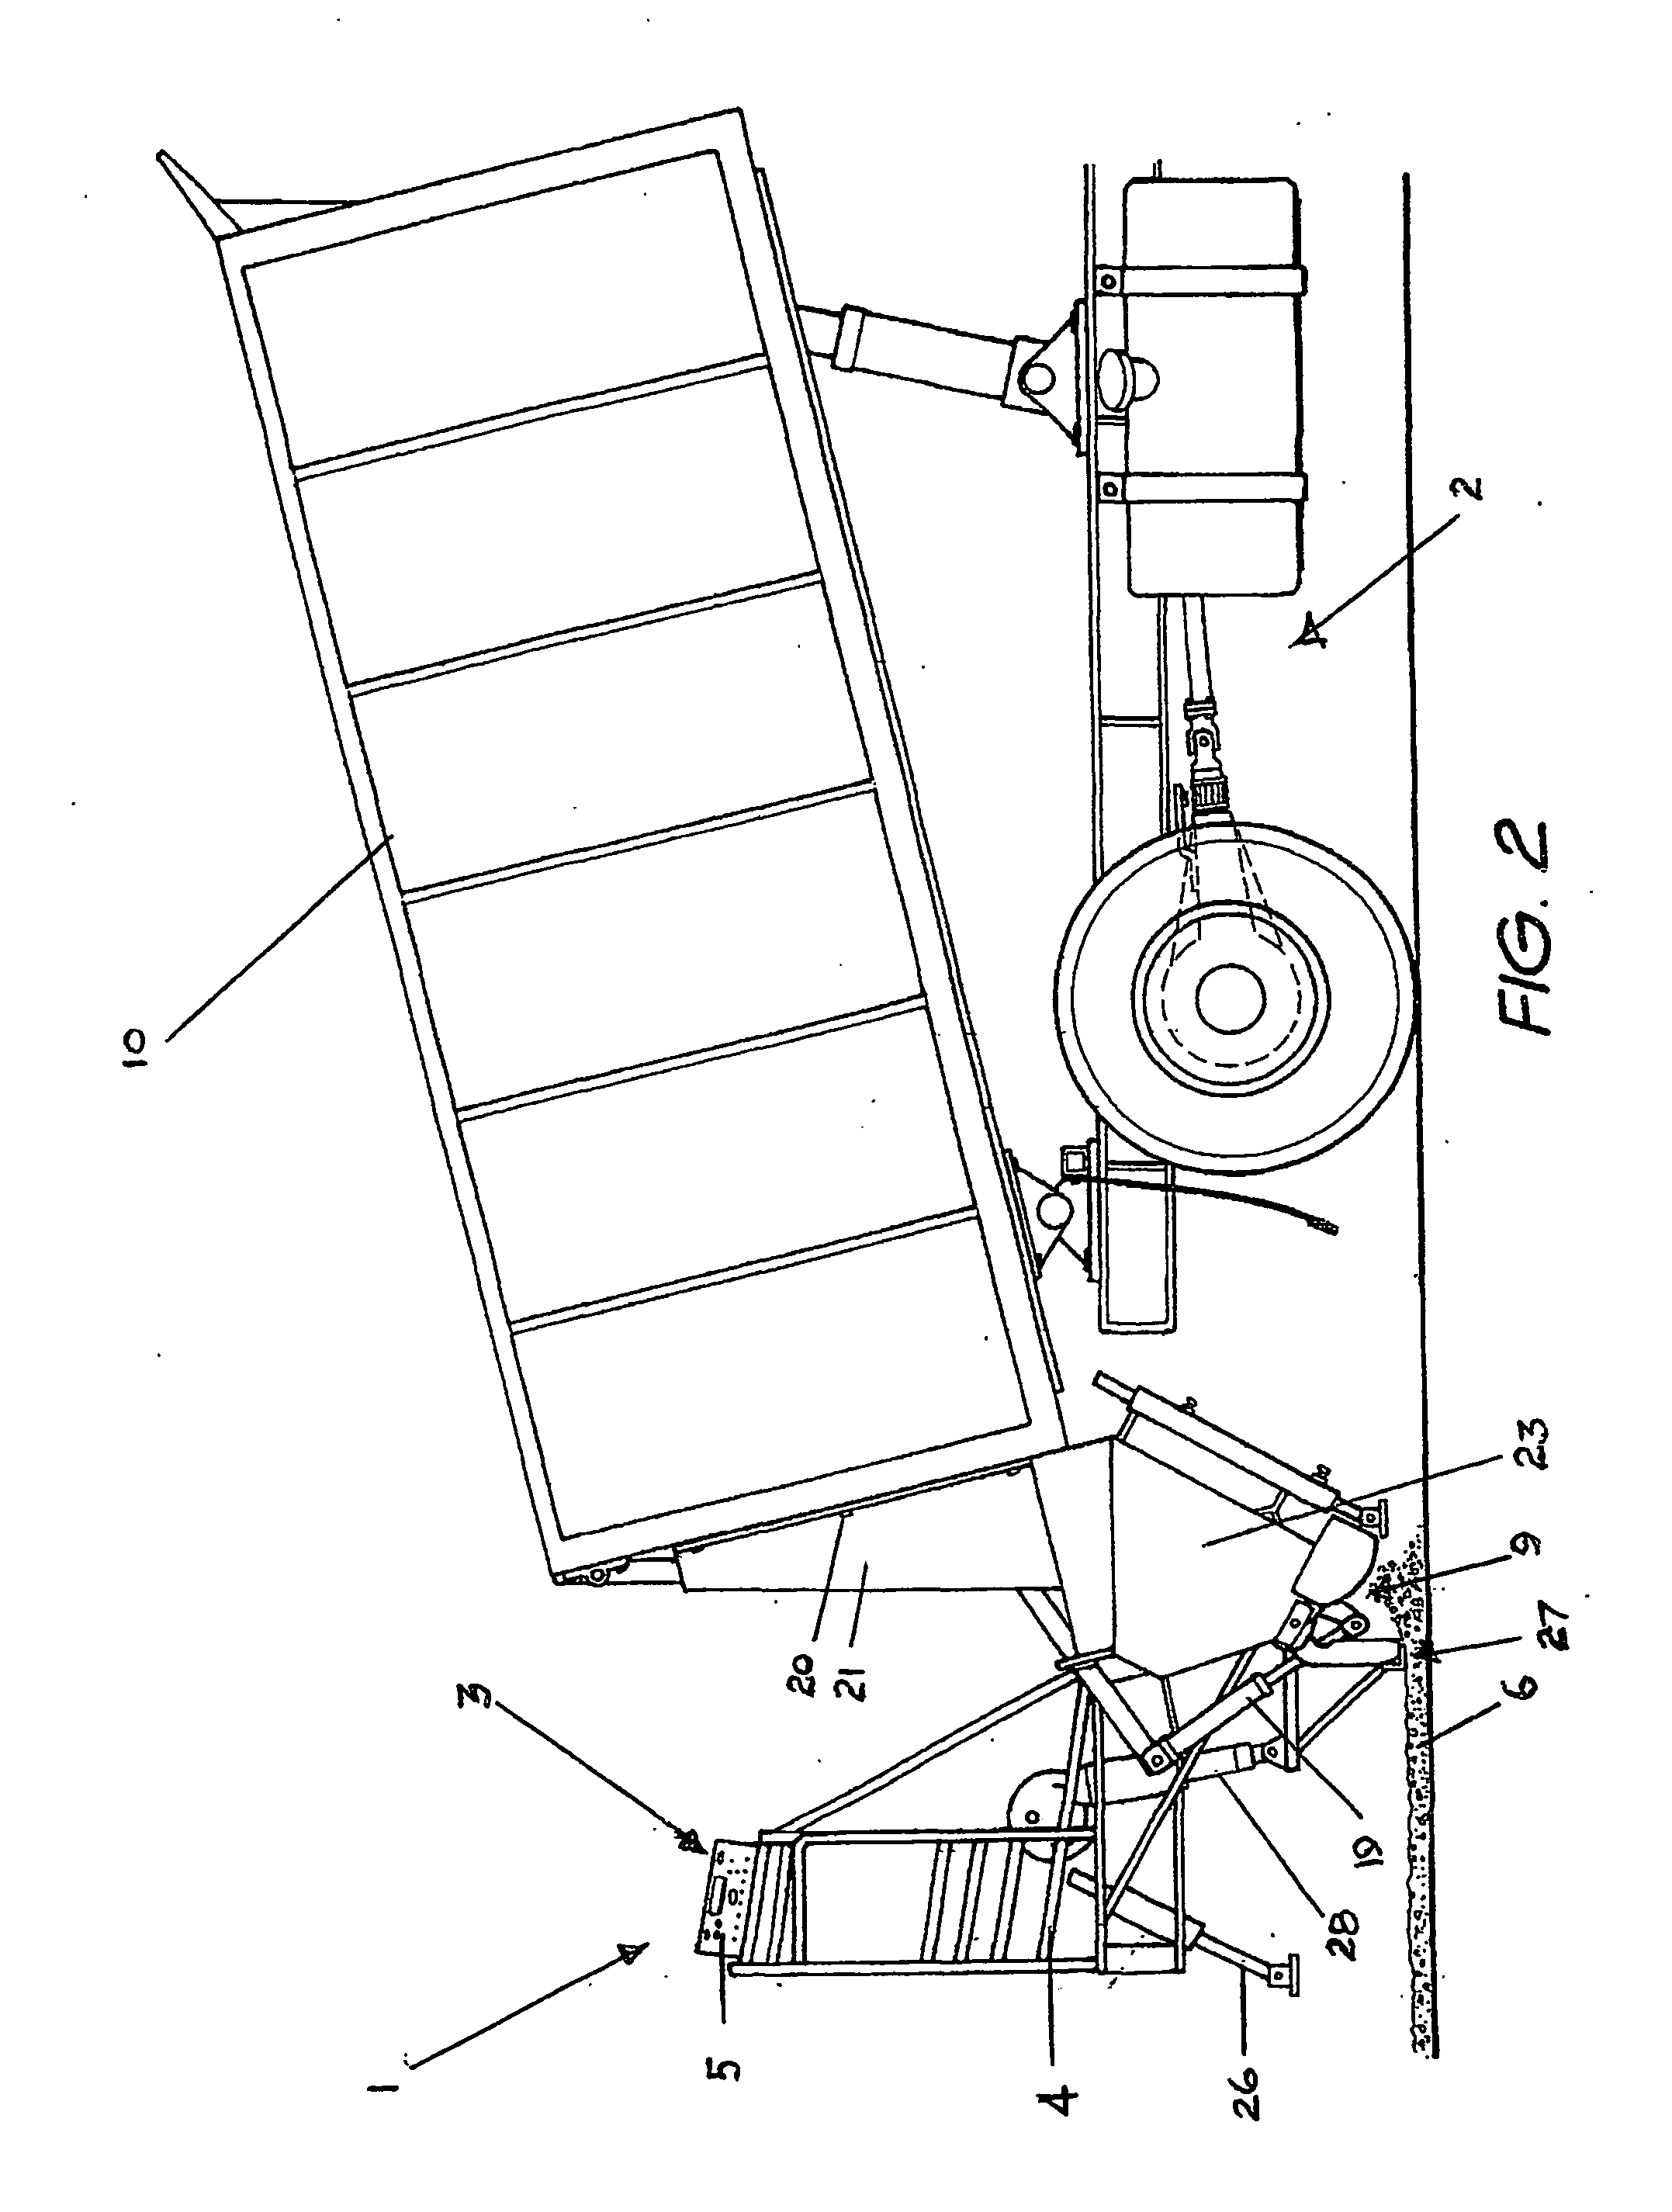 Method and apparatus for spreading aggregate and road building materials related to vehicle speed